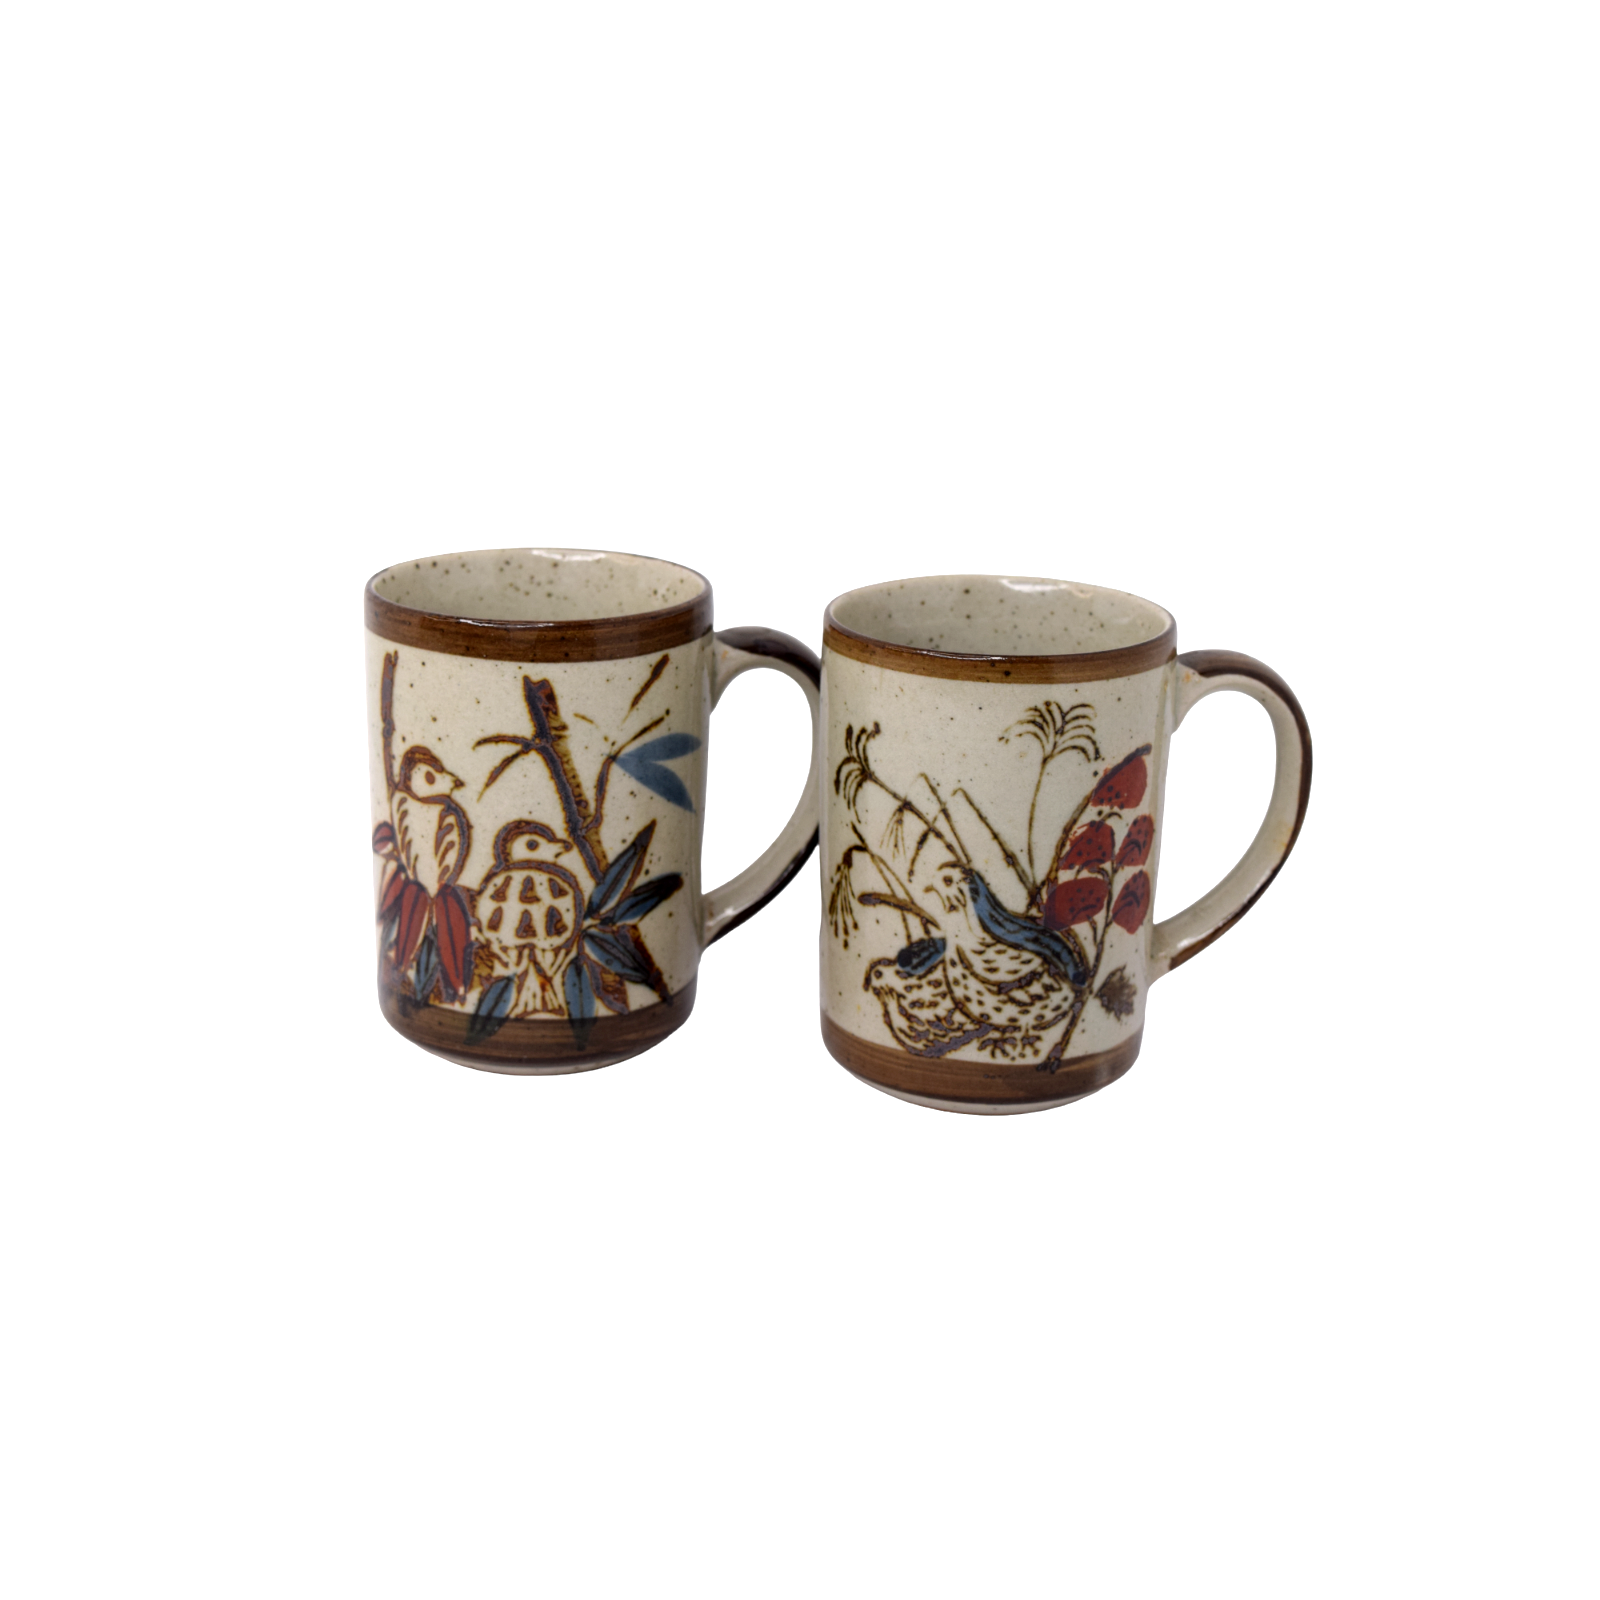 Primary image for Set of 2 Stoneware Coffee Mug Cup w/ Bird Designs Unbranded